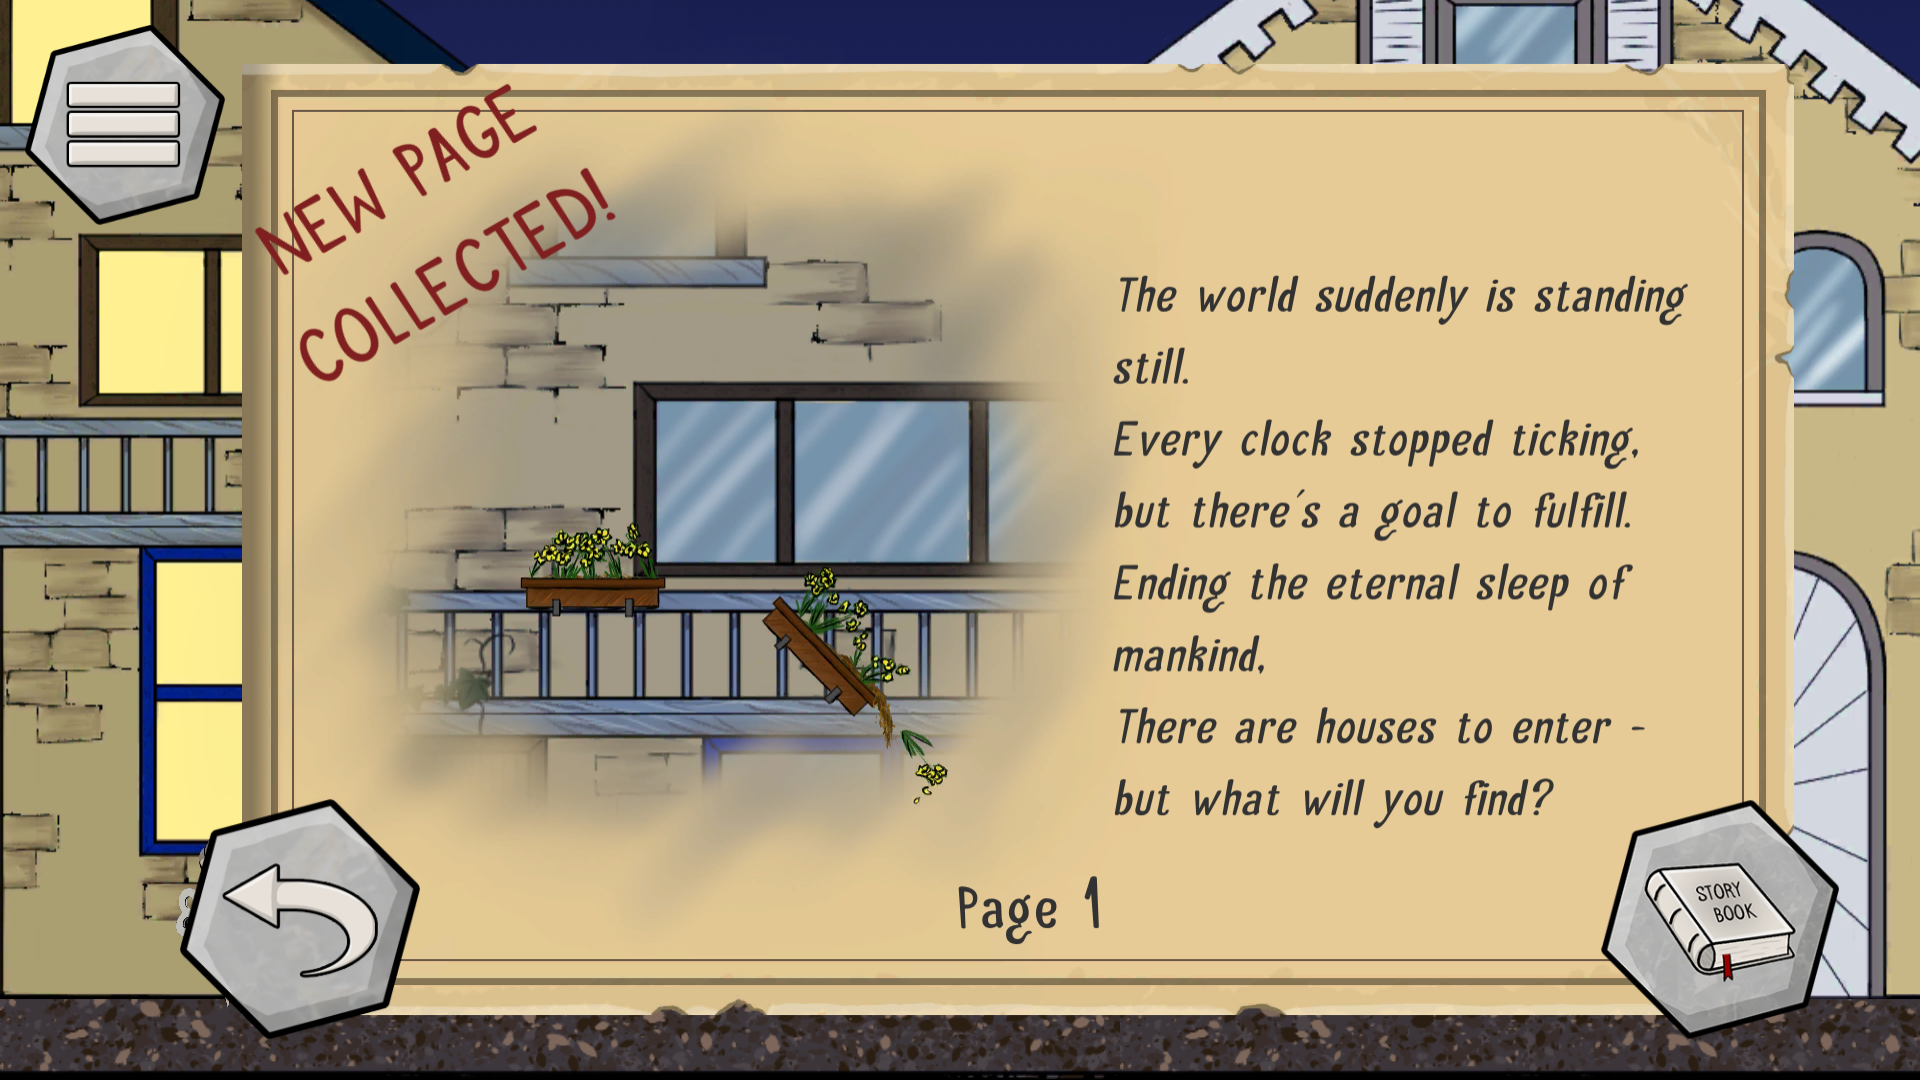 Screenshot of the game WAKE. It shows a book page with the page number 1 and the message 'New Page Collected!' in the top left. On the page is an image of a flower box falling from a balcony and a poem: 'The world suddenly is standing still. Every clock stopped ticking, but there's a goal to fulfill. Ending the eternal sleep of mankind. There are houses to enter - but what will you find?' There is a menu button in the top left, a back button in the bottom left and a button to open the whole story book in the bottom right of the screen.